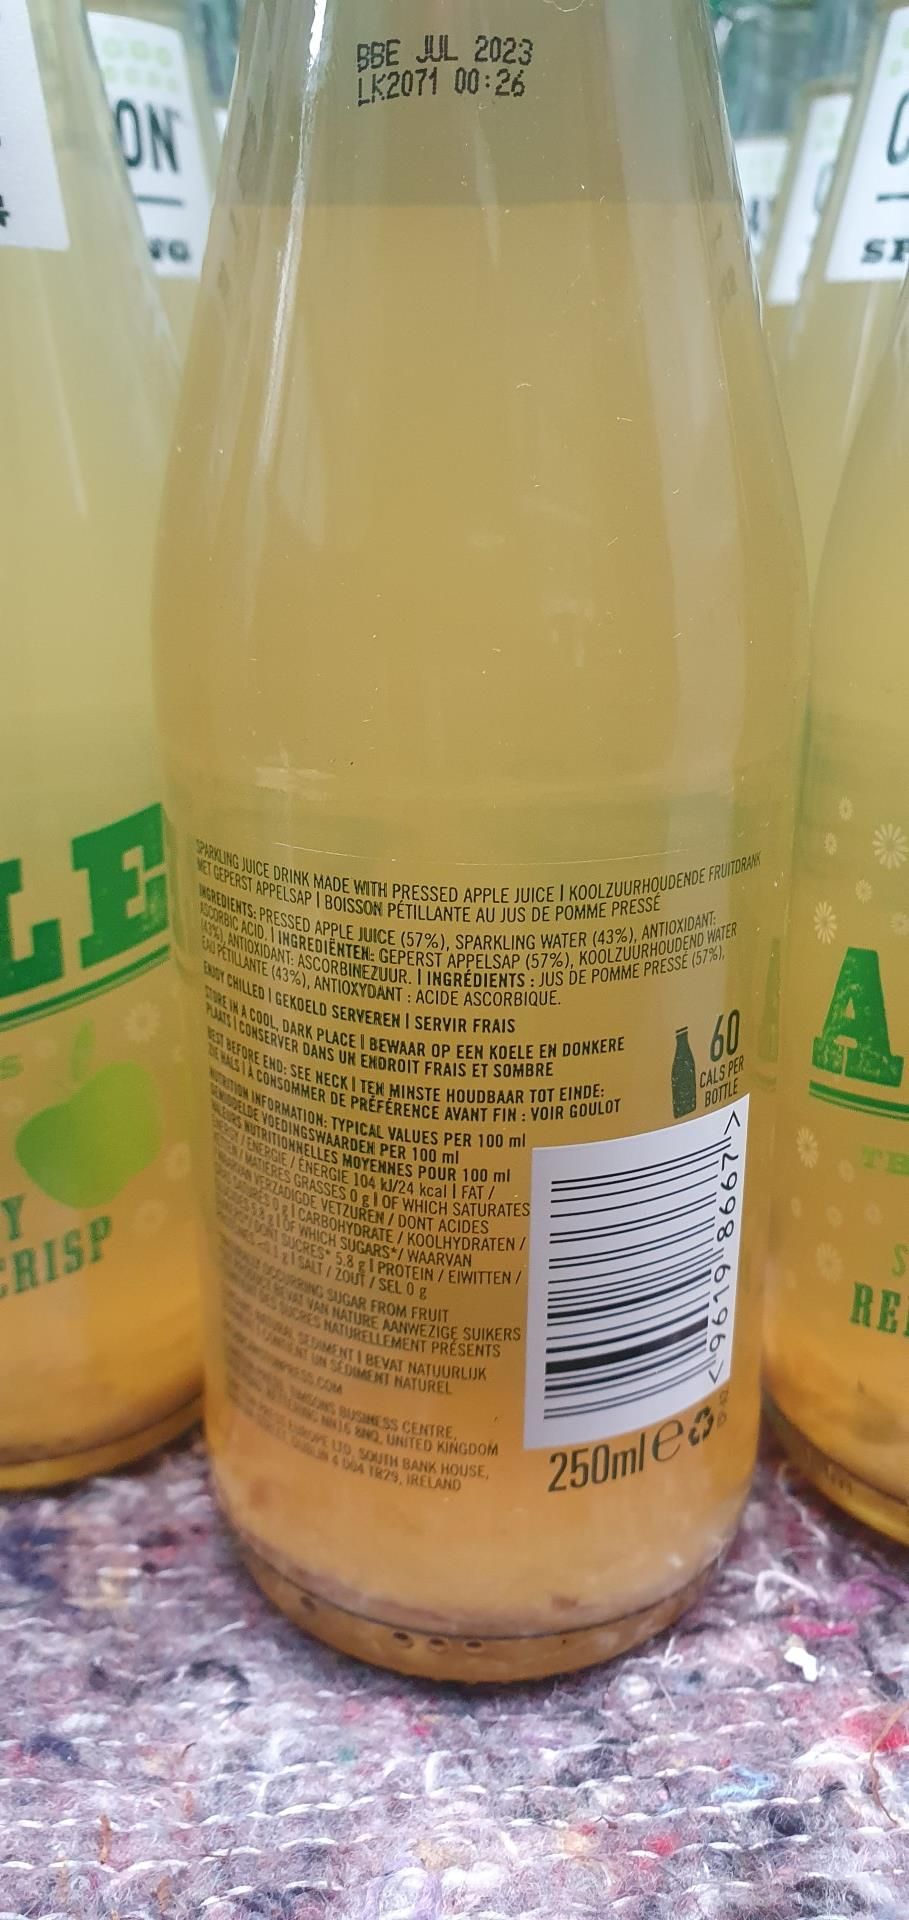 80 x Bottles of Cawston Press 250ml Sparkling Apple and Lemonade Drinks - Ref: TCH218 - CL840 - - Image 6 of 7